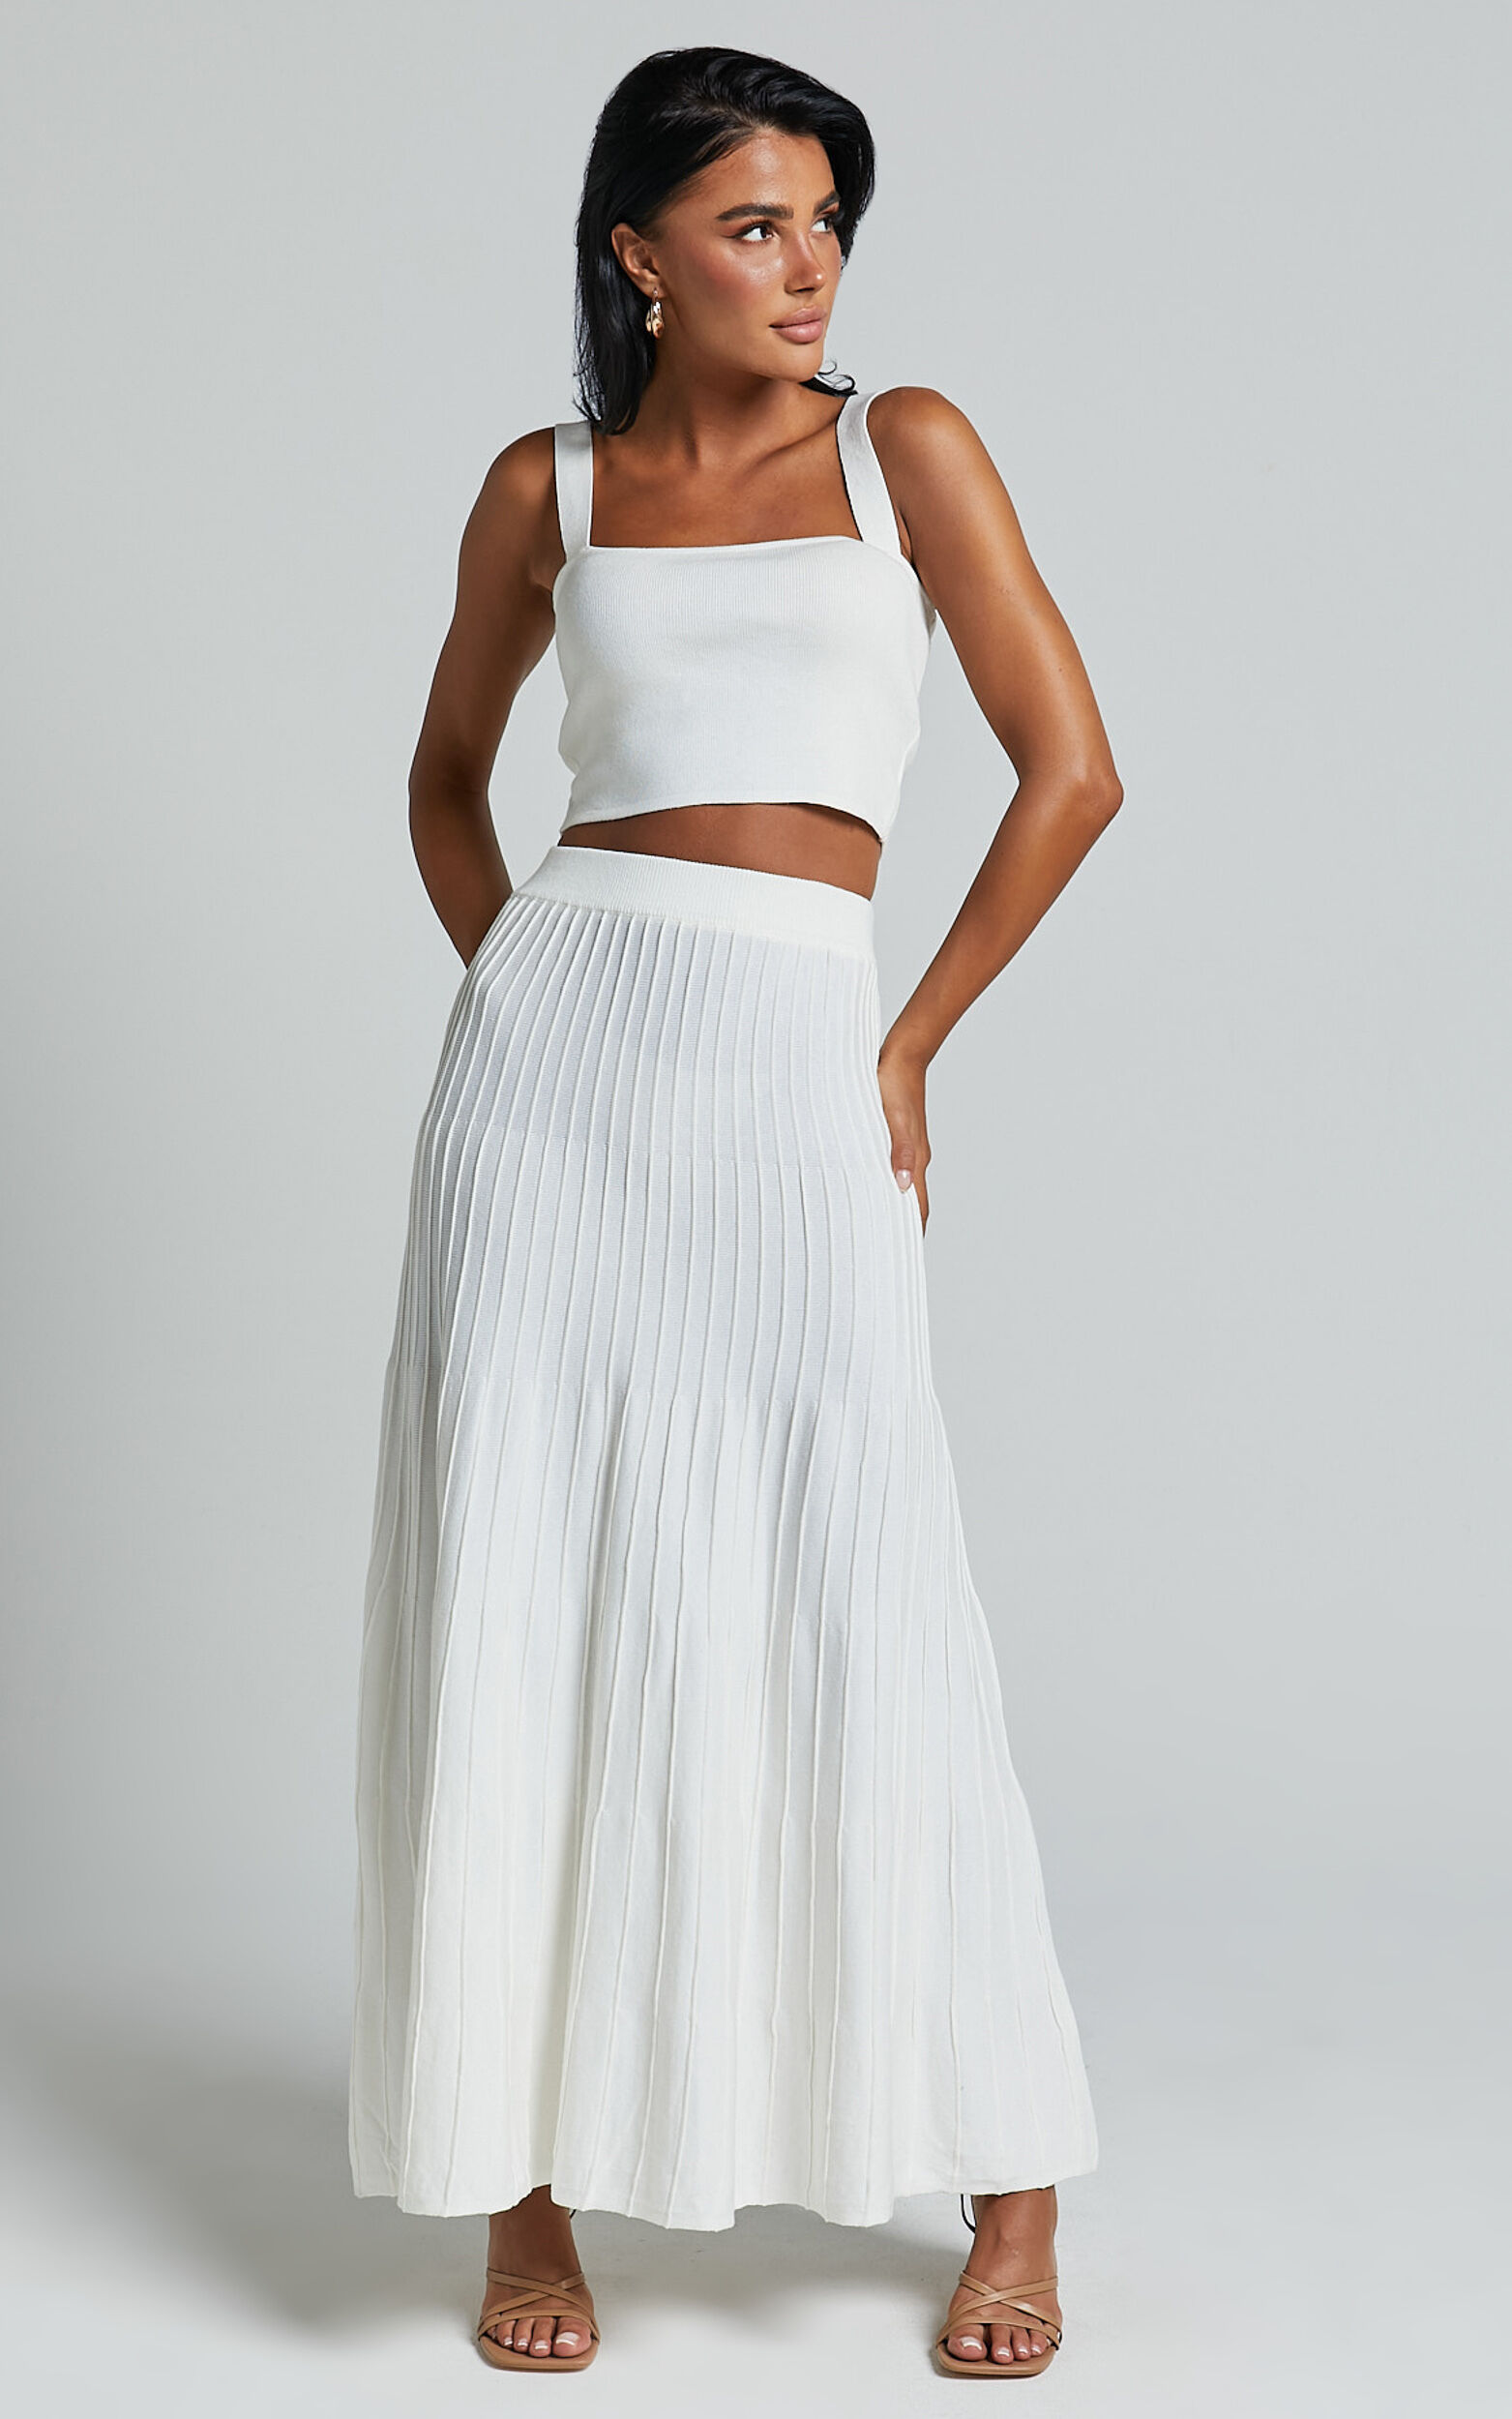 https://images.showpo.com/dw/image/v2/BDPQ_PRD/on/demandware.static/-/Sites-sp-master-catalog/default/dw7e5e607d/images/cherylene-two-piece-set-knitted-square-neck-crop-top-and-midaxi-skirt-set-SC24010001/Cherylene_Two_Piece_Set_-_Knitted_Square_Neck_Crop_Top_and_Midi_Skirt_Set_in_Off_White_.JPG?sw=1563&sh=2500